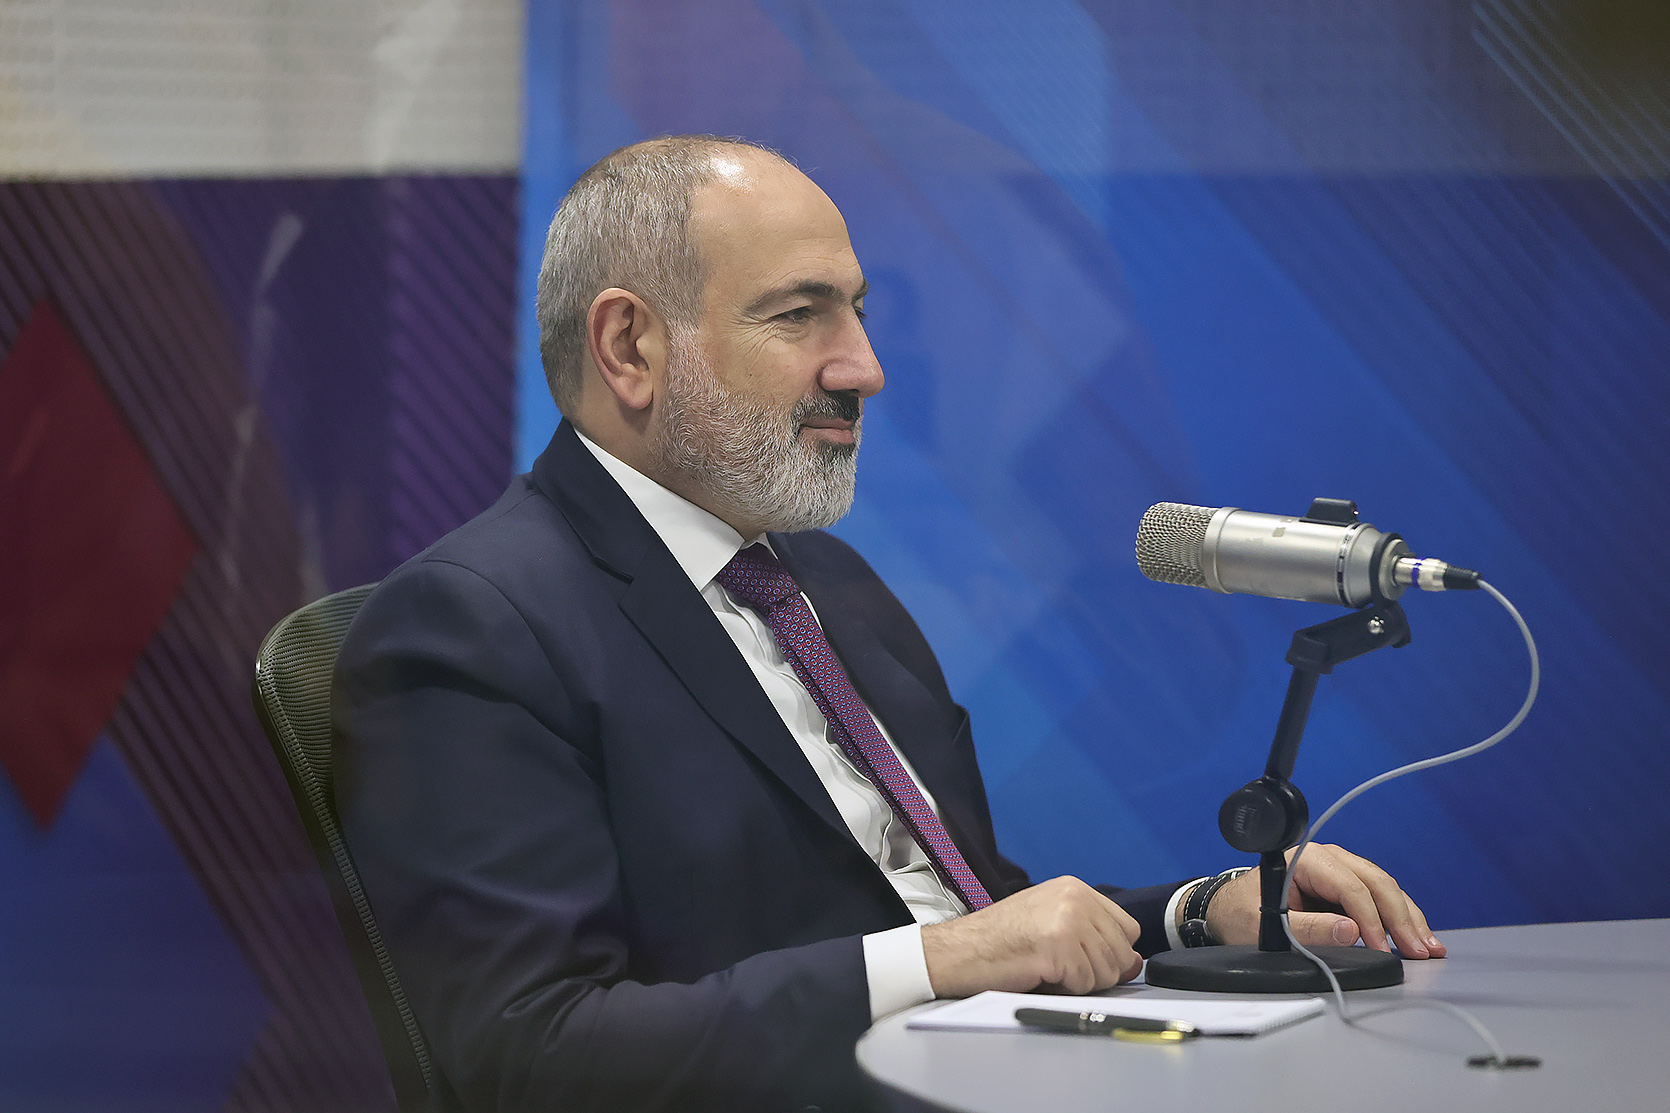 Pashinyan speaks about the security of Armenia: Interview